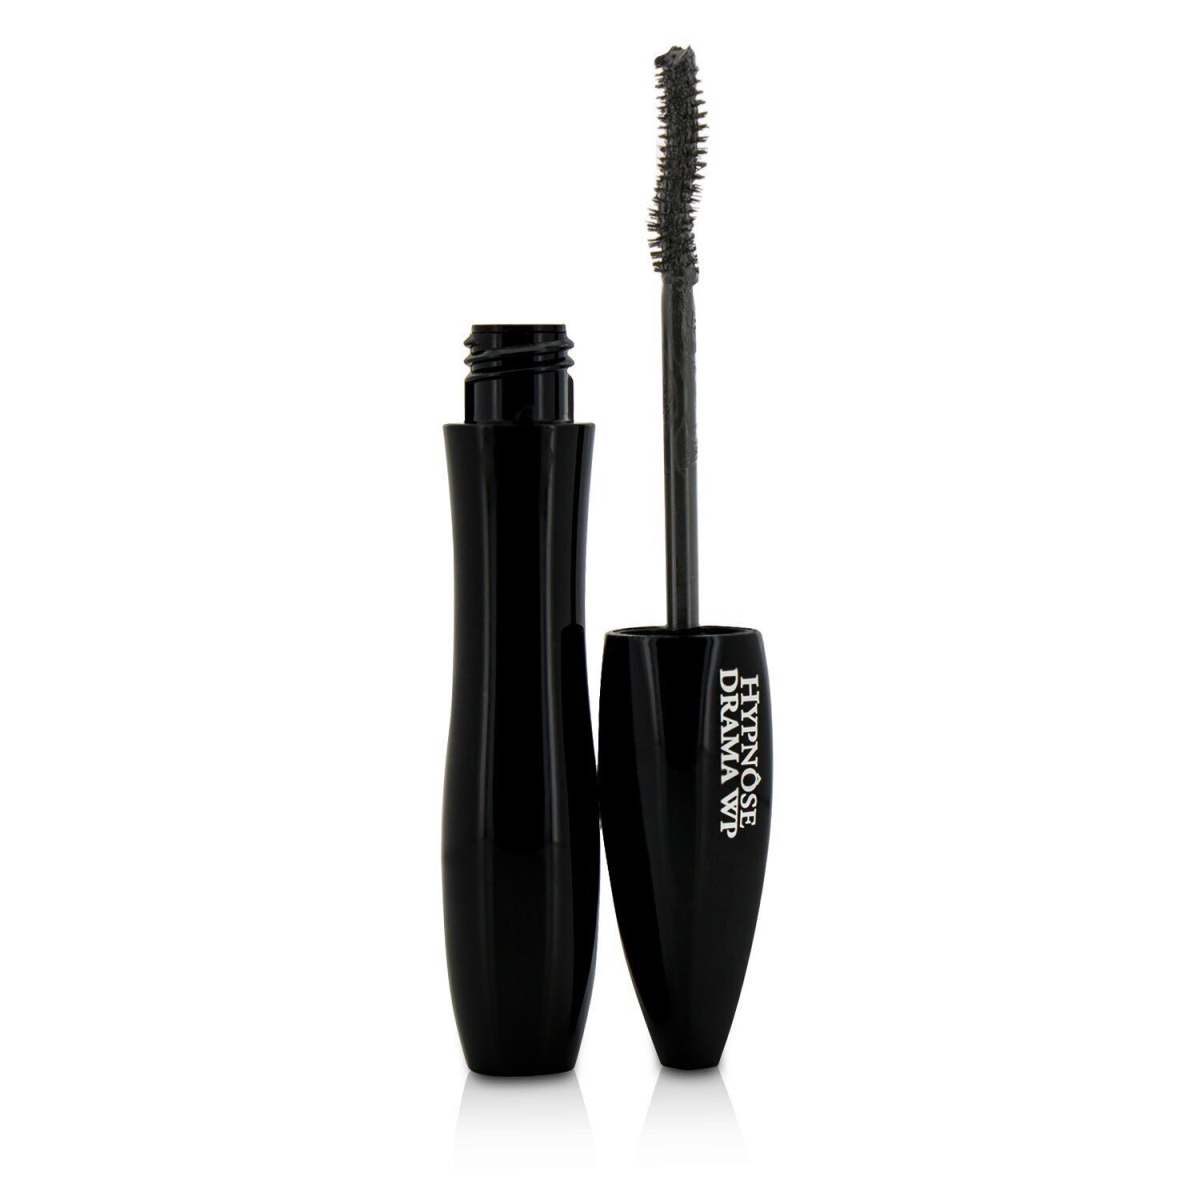 Picture of Lancome 111408 0.2 oz Hypnose Drama Waterproof Full Impact Volume Mascara - No.01 Excessive Black